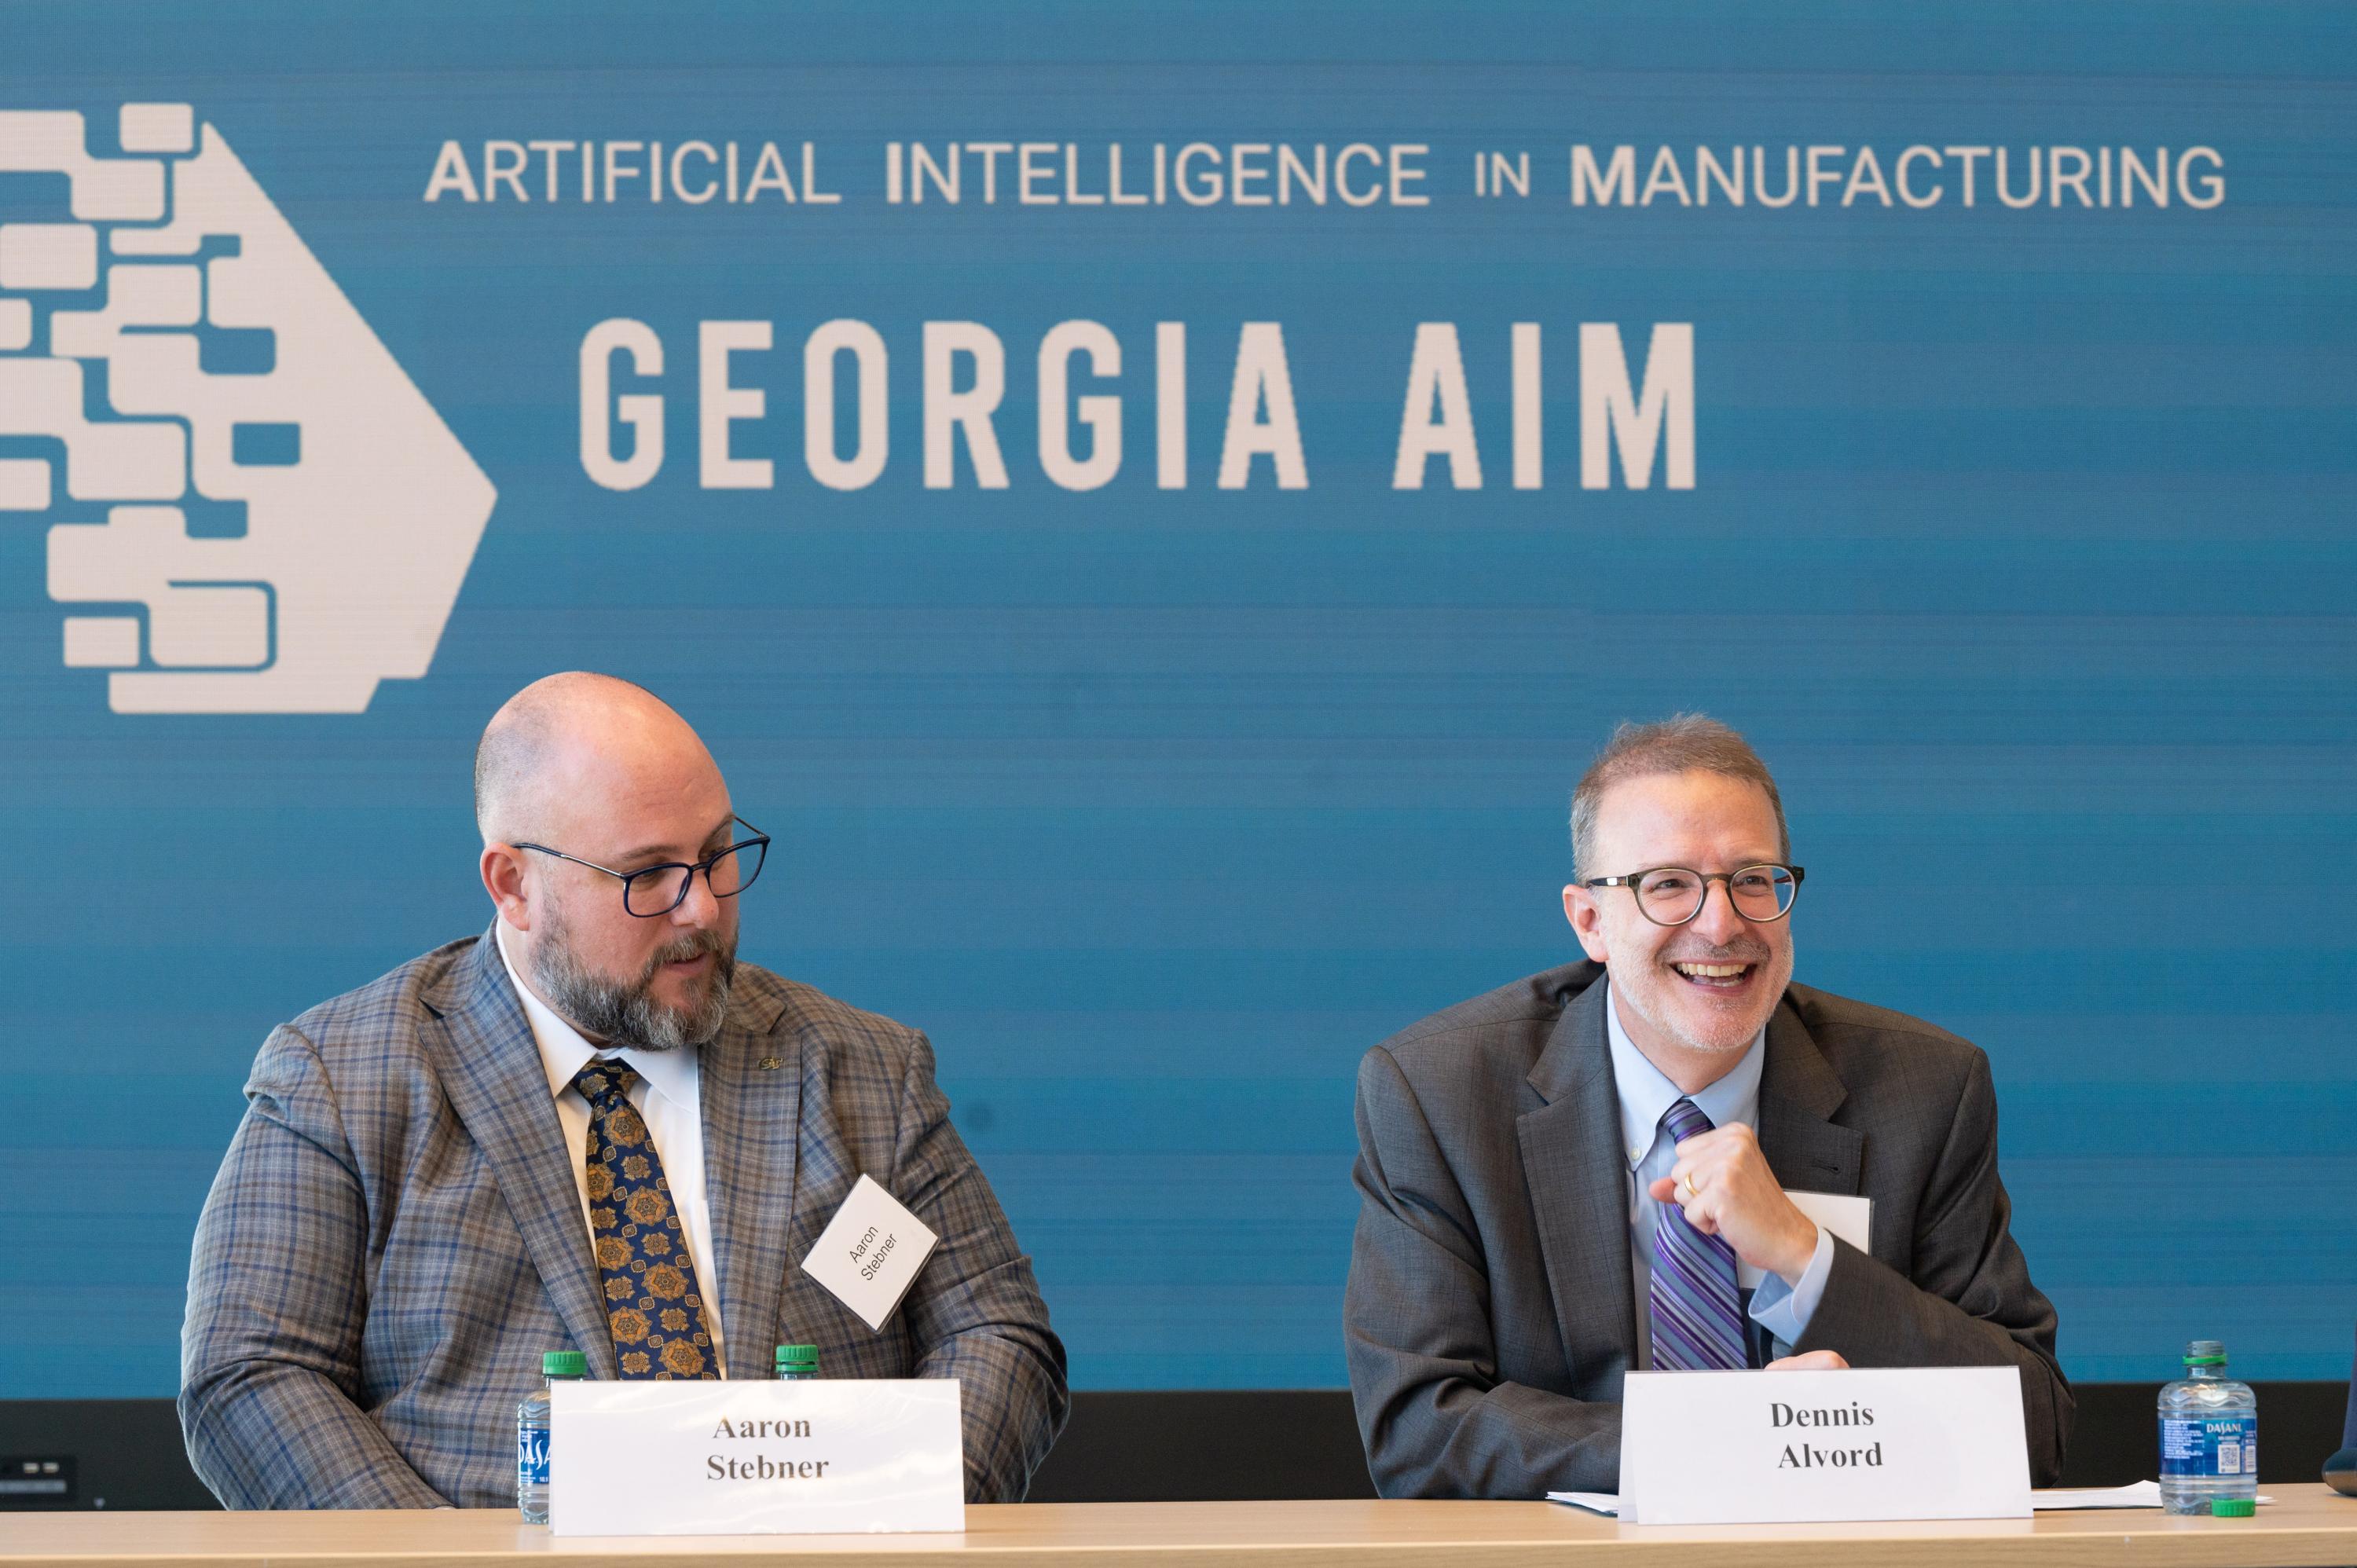 Dennis Alvord (right), the Economic Development Administration’s deputy assistant secretary for economic development and chief operating officer, reacts to comment during a roundtable discussion with members of the Georgia AIM coalition, a multi-program effort being led by Georgia Tech to bolster innovation in manufacturing and artificial intelligence. (PHOTO: Joya Chapman)